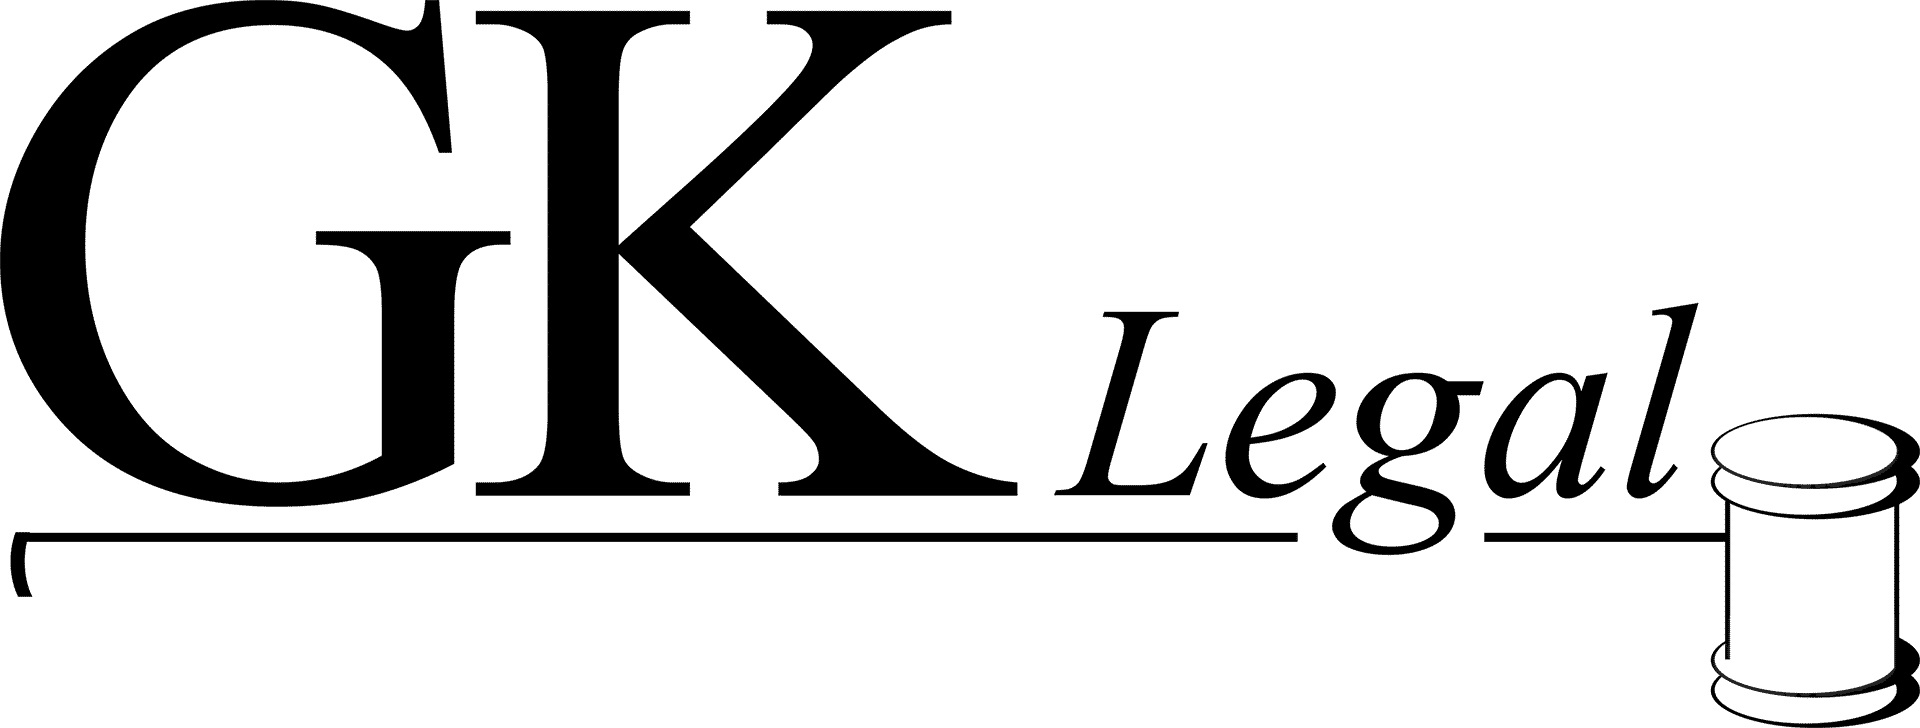 GK Legal Group Profile Picture